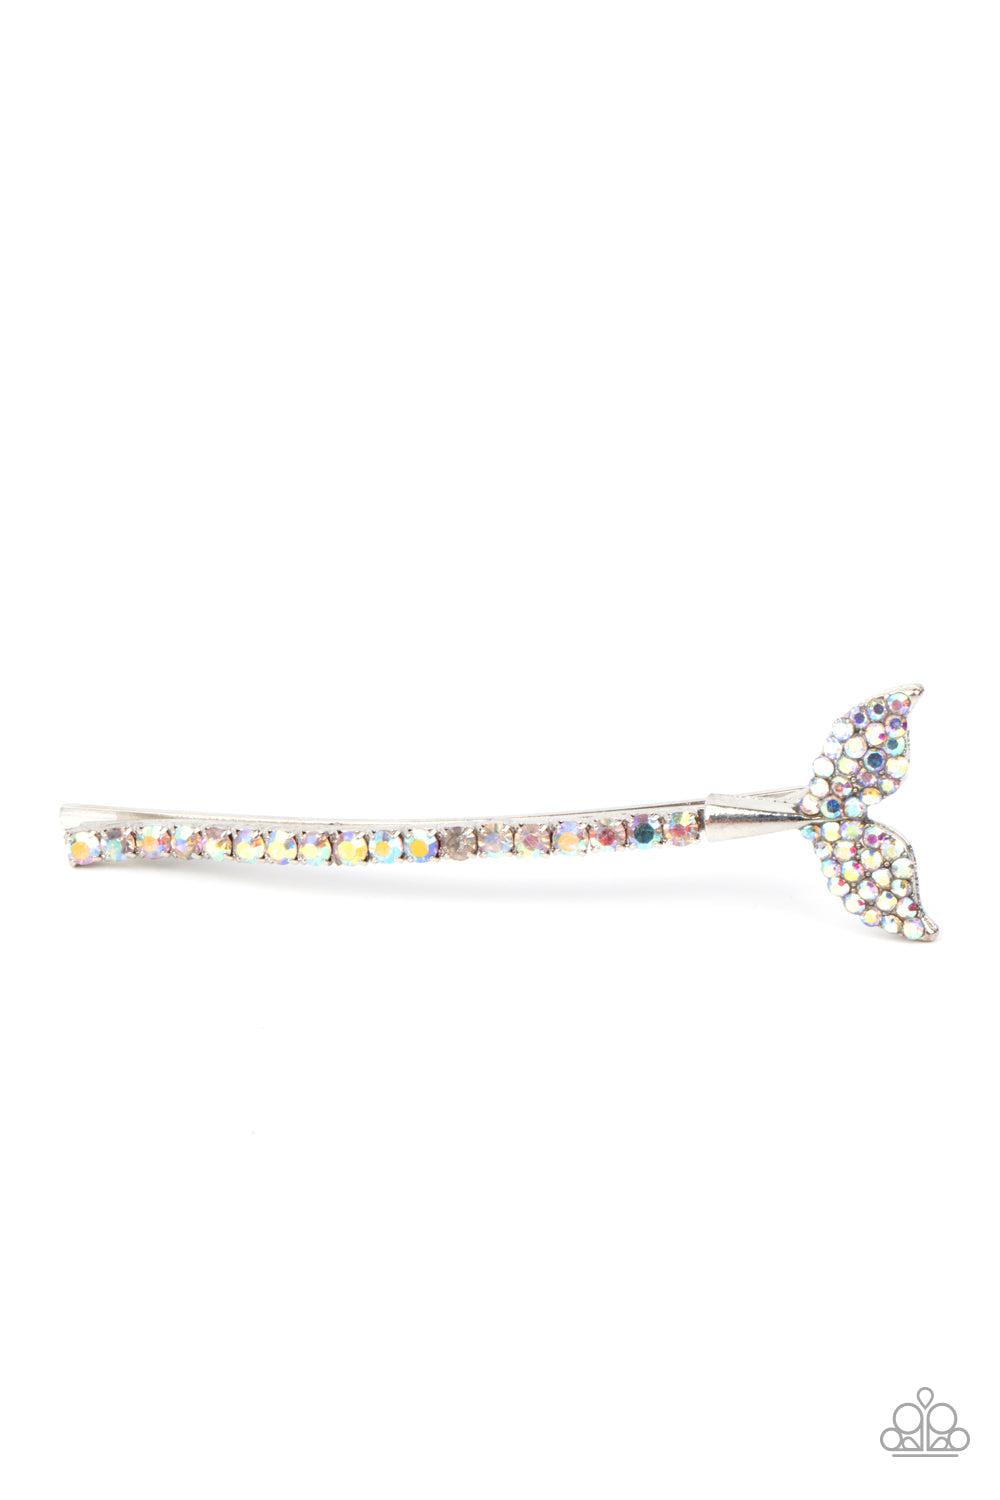 Deep Dive Multi Iridescent Mermaid Tail Hair Pin - Paparazzi Accessories-on model - CarasShop.com - $5 Jewelry by Cara Jewels